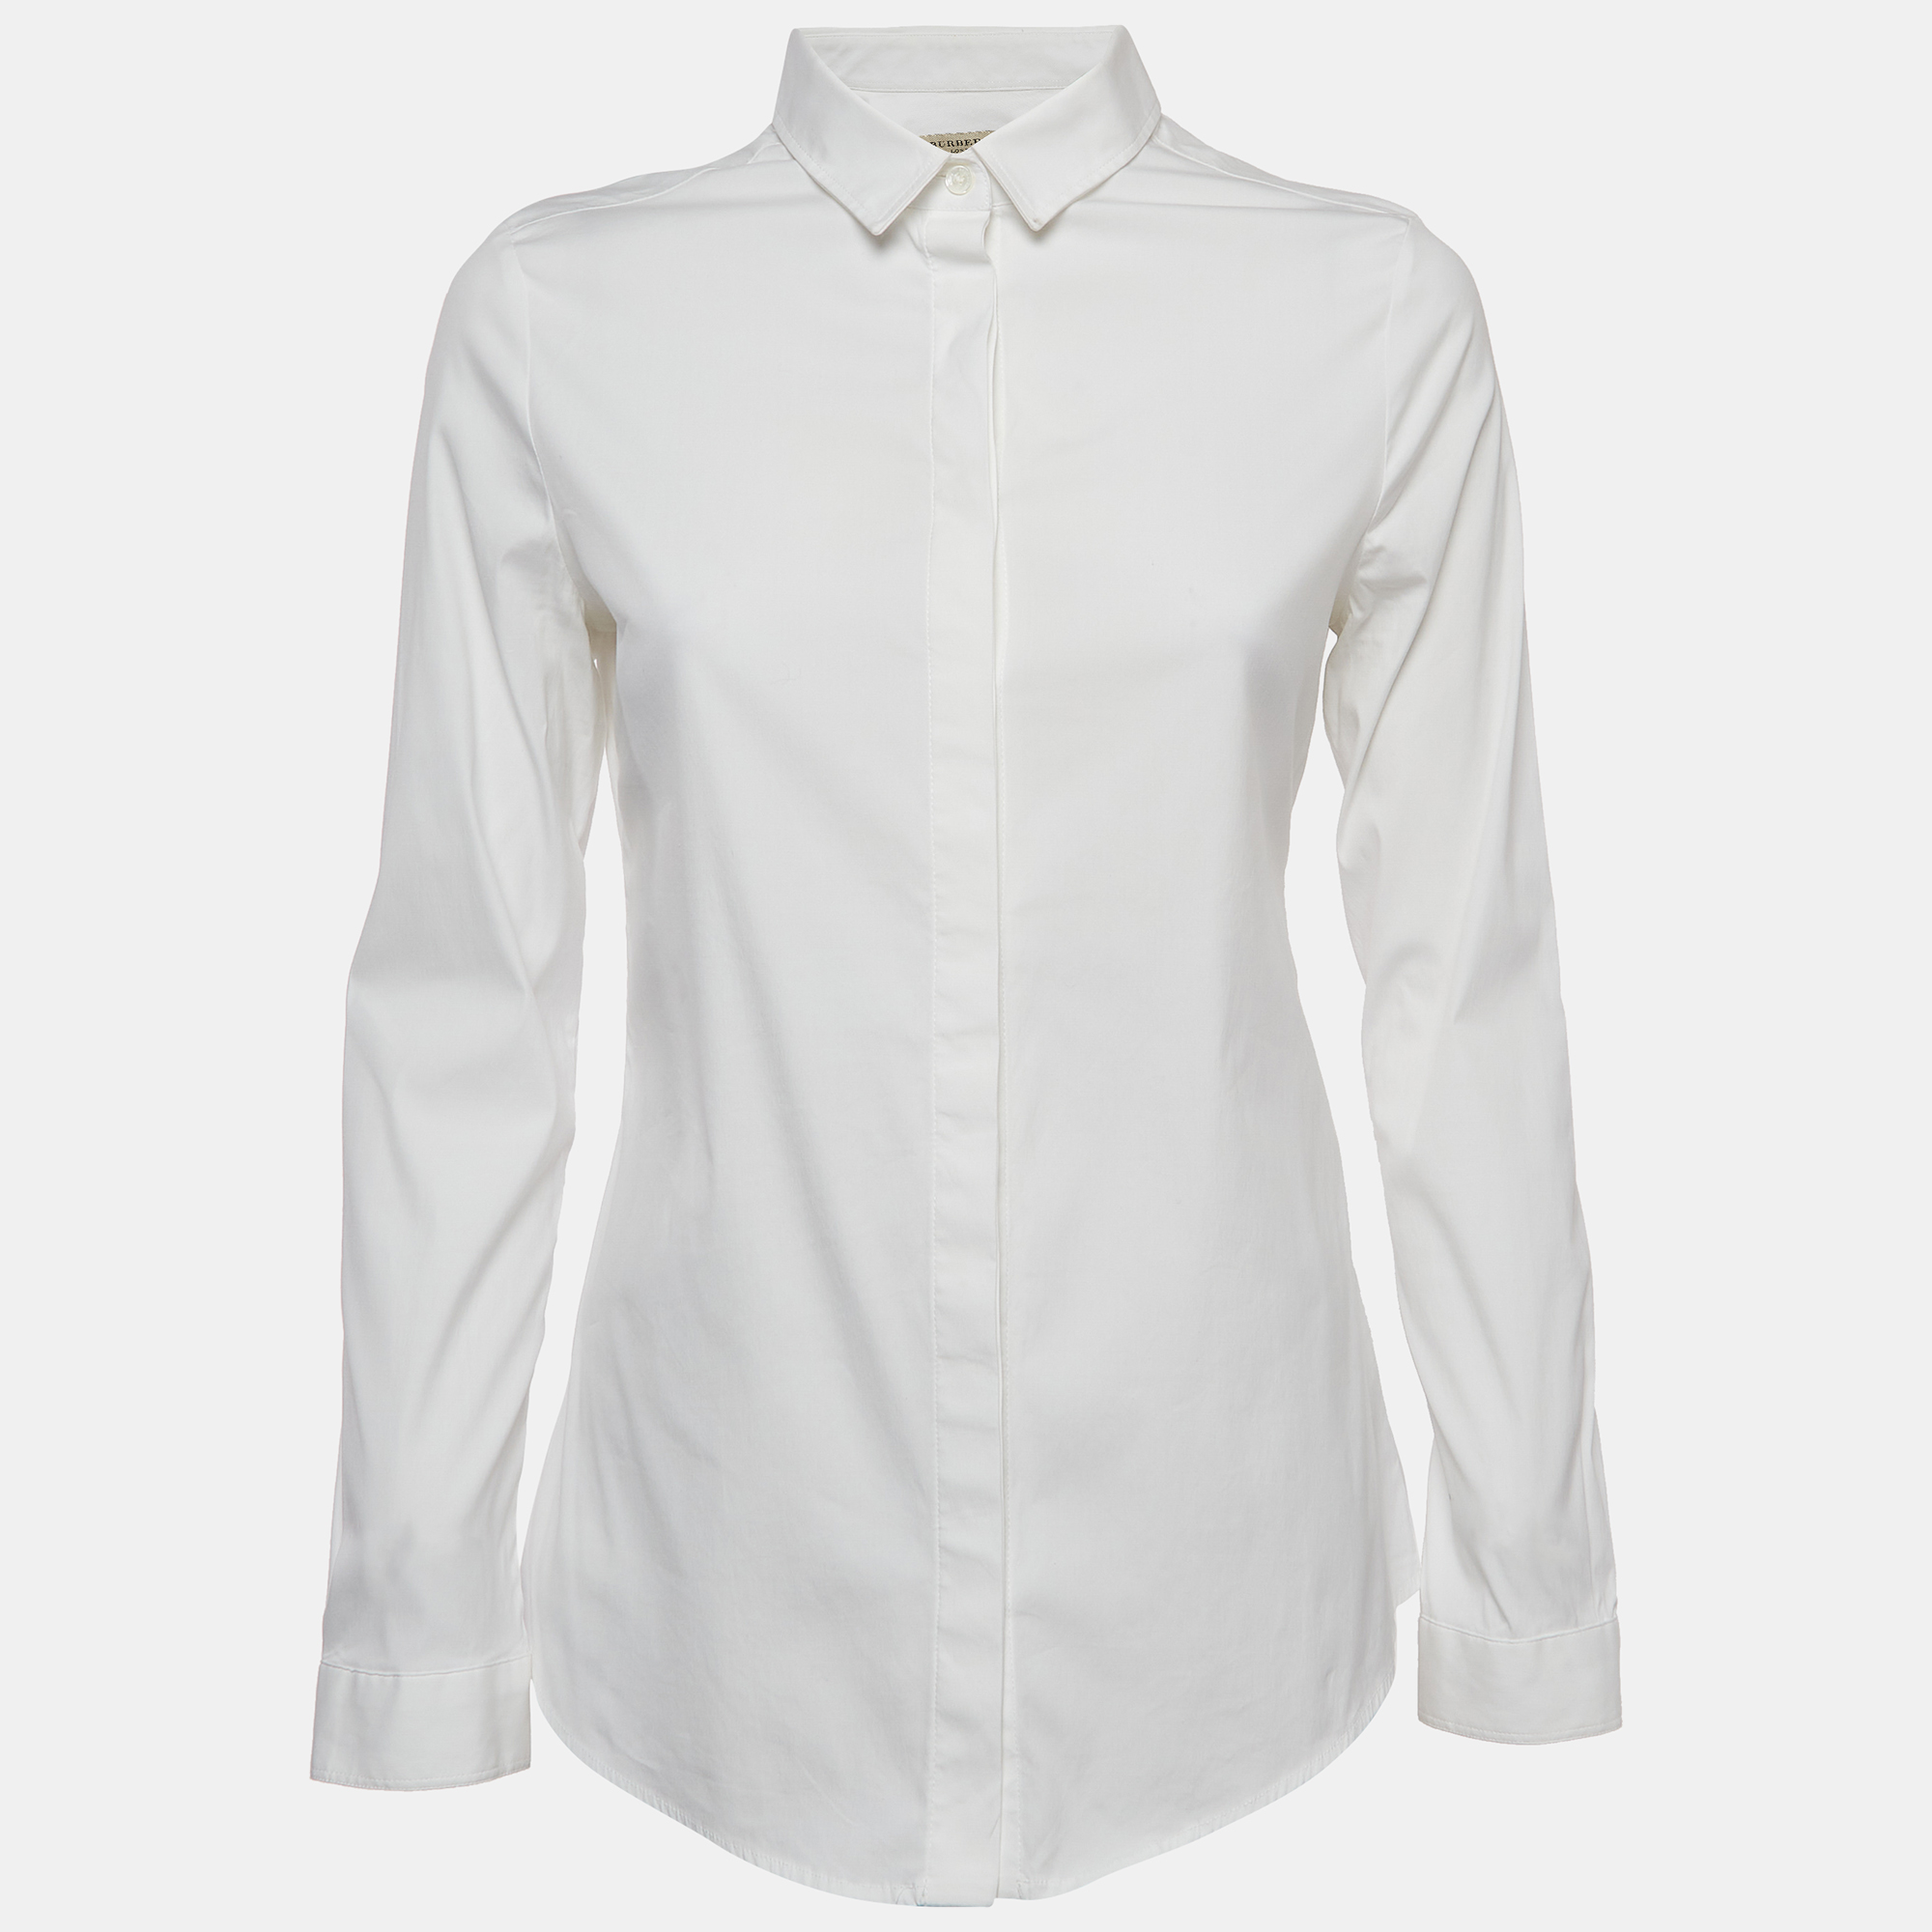 Burberry London White Cotton Button Front Full Sleeve Shirt S